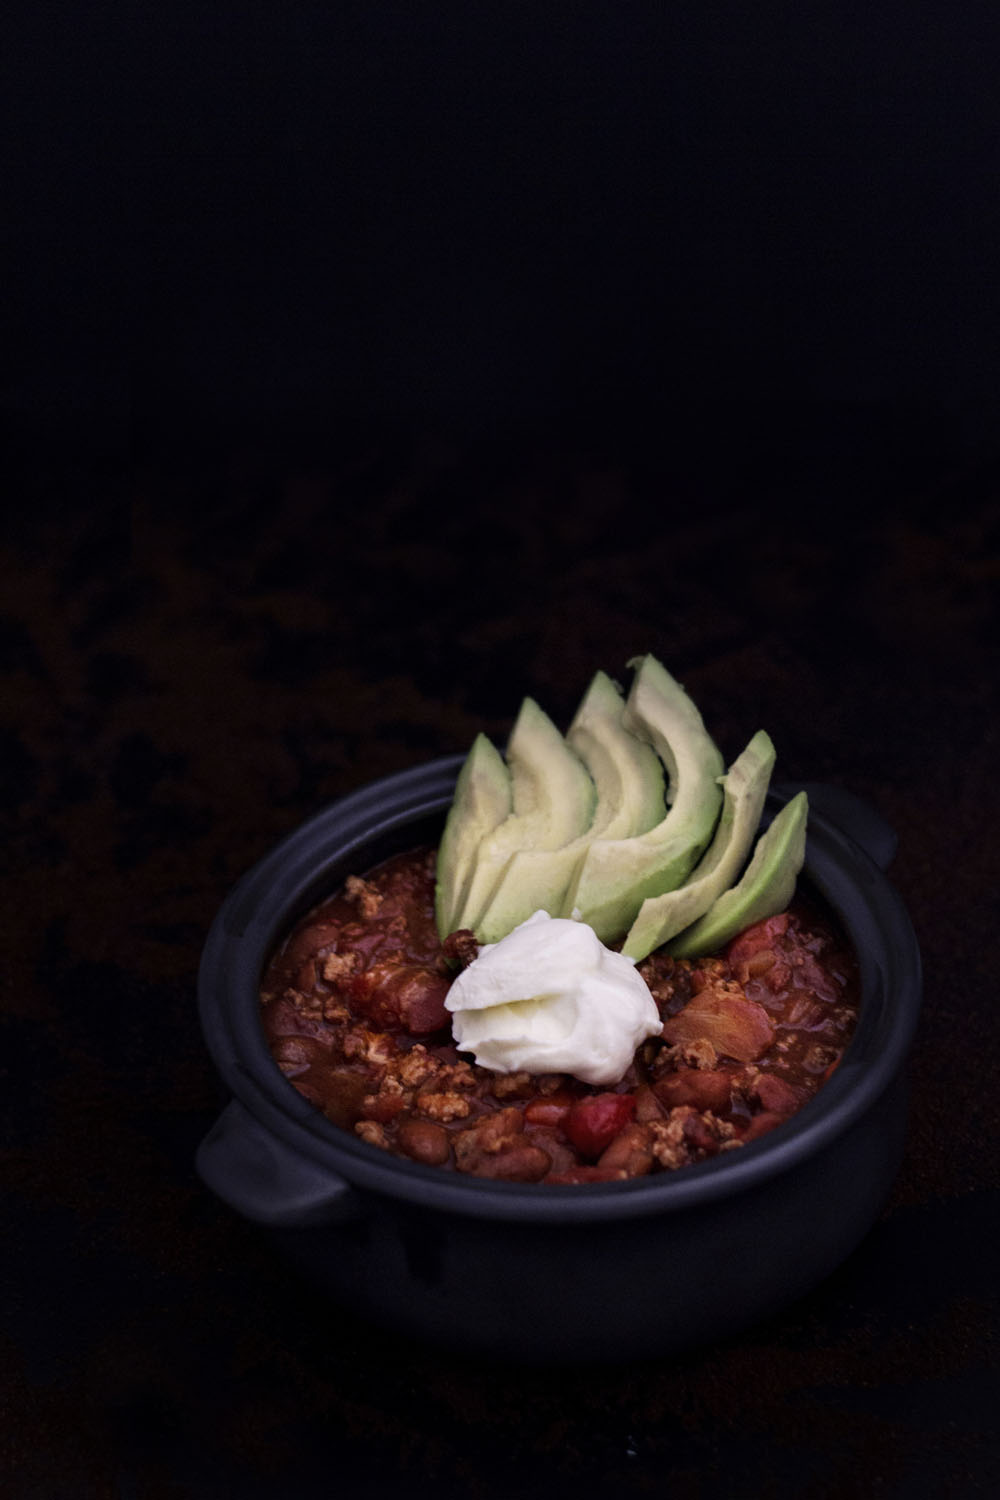 Weekend Kitchen: Mexican Chili